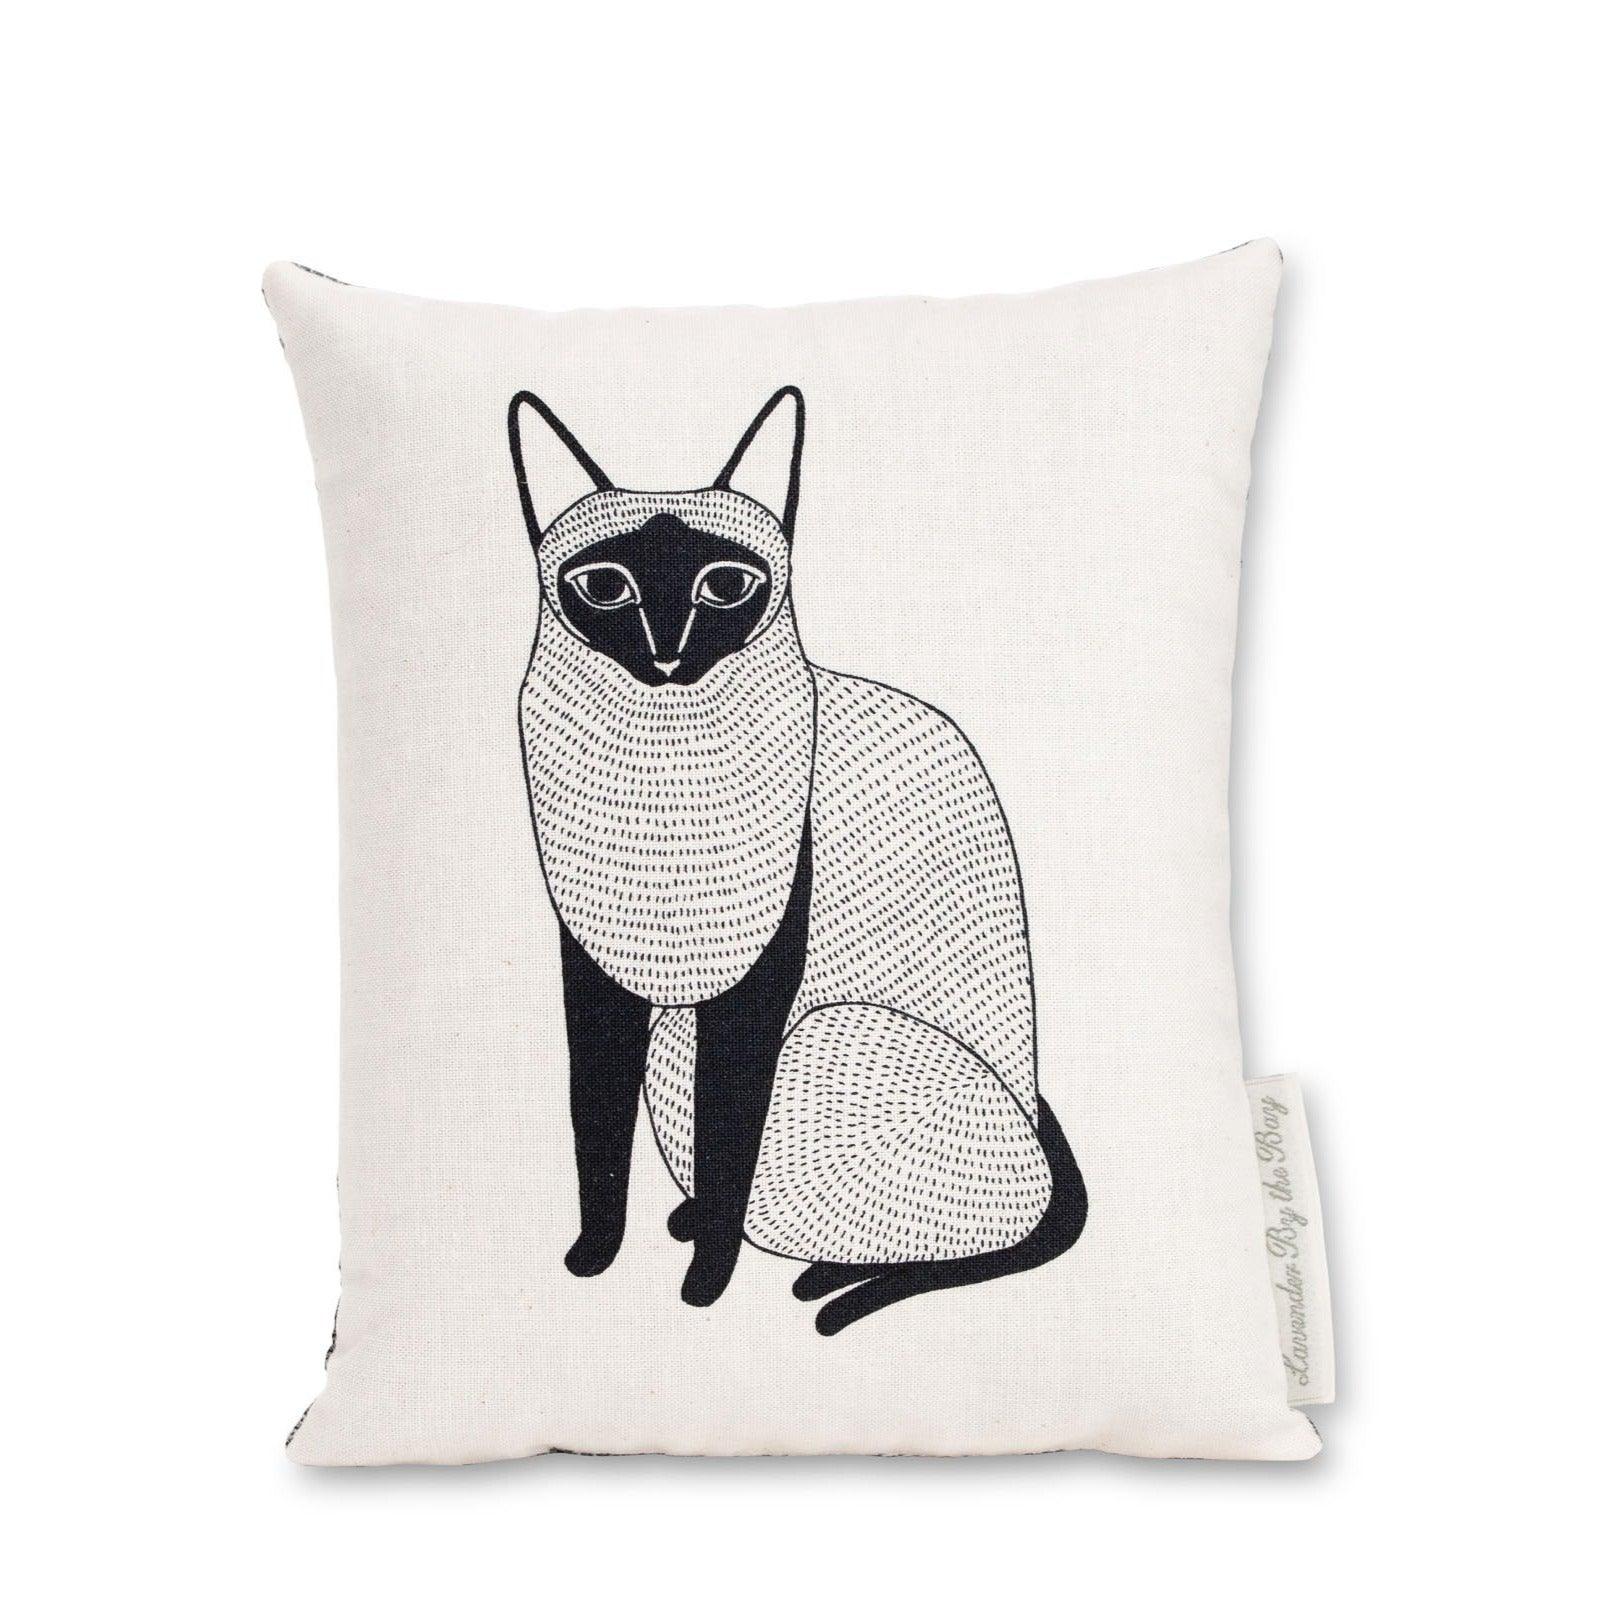 Stylized cat with dash pattern and black legs on white background